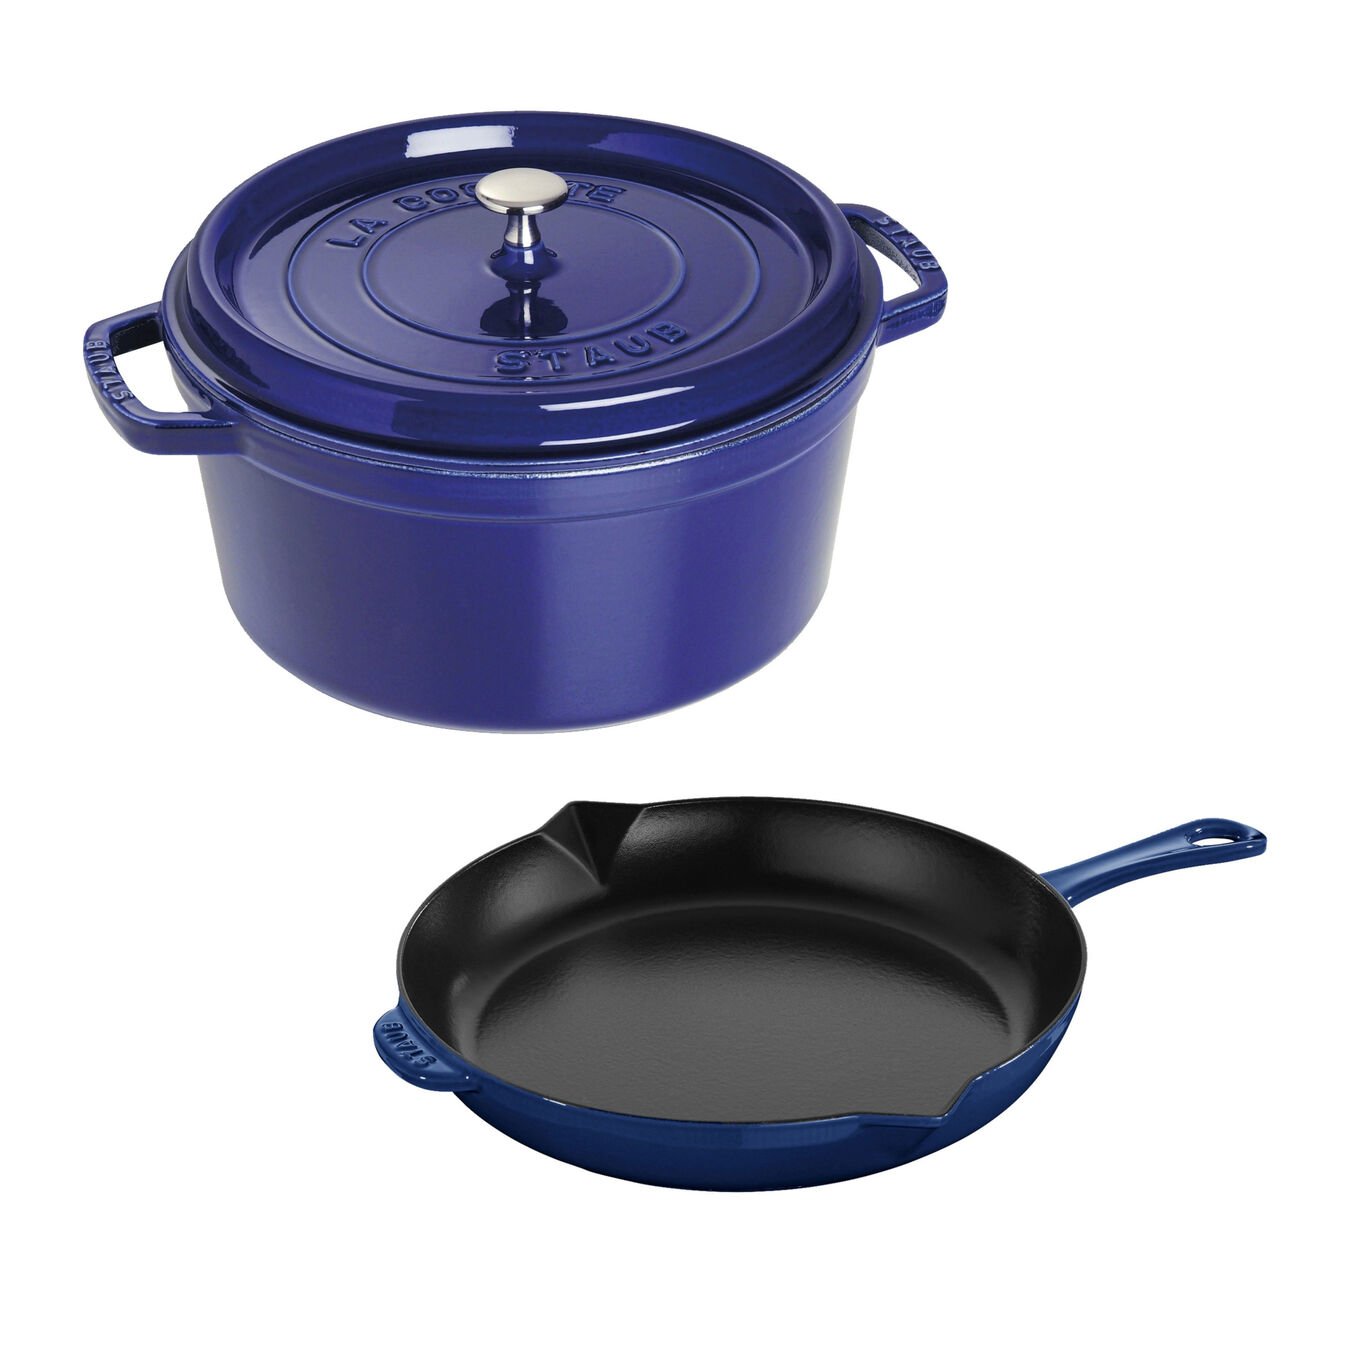 3-pc, Cocotte and Fry Pan Set, dark blue,,large 1